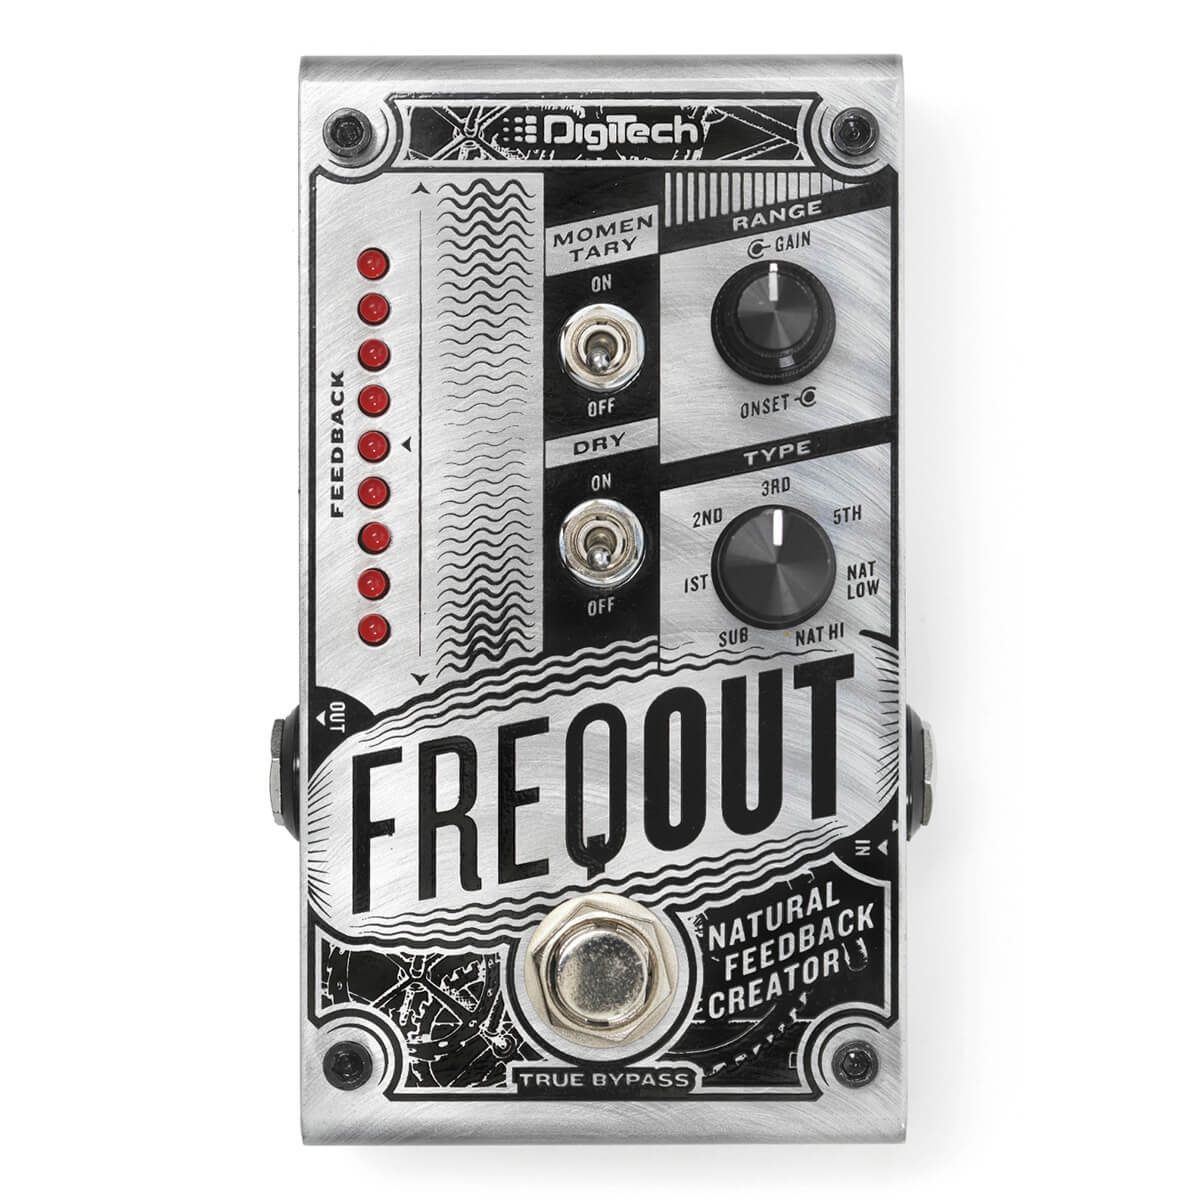 DigiTech FreqOut natural feedback creator guitar pedal with black graphics. Top view